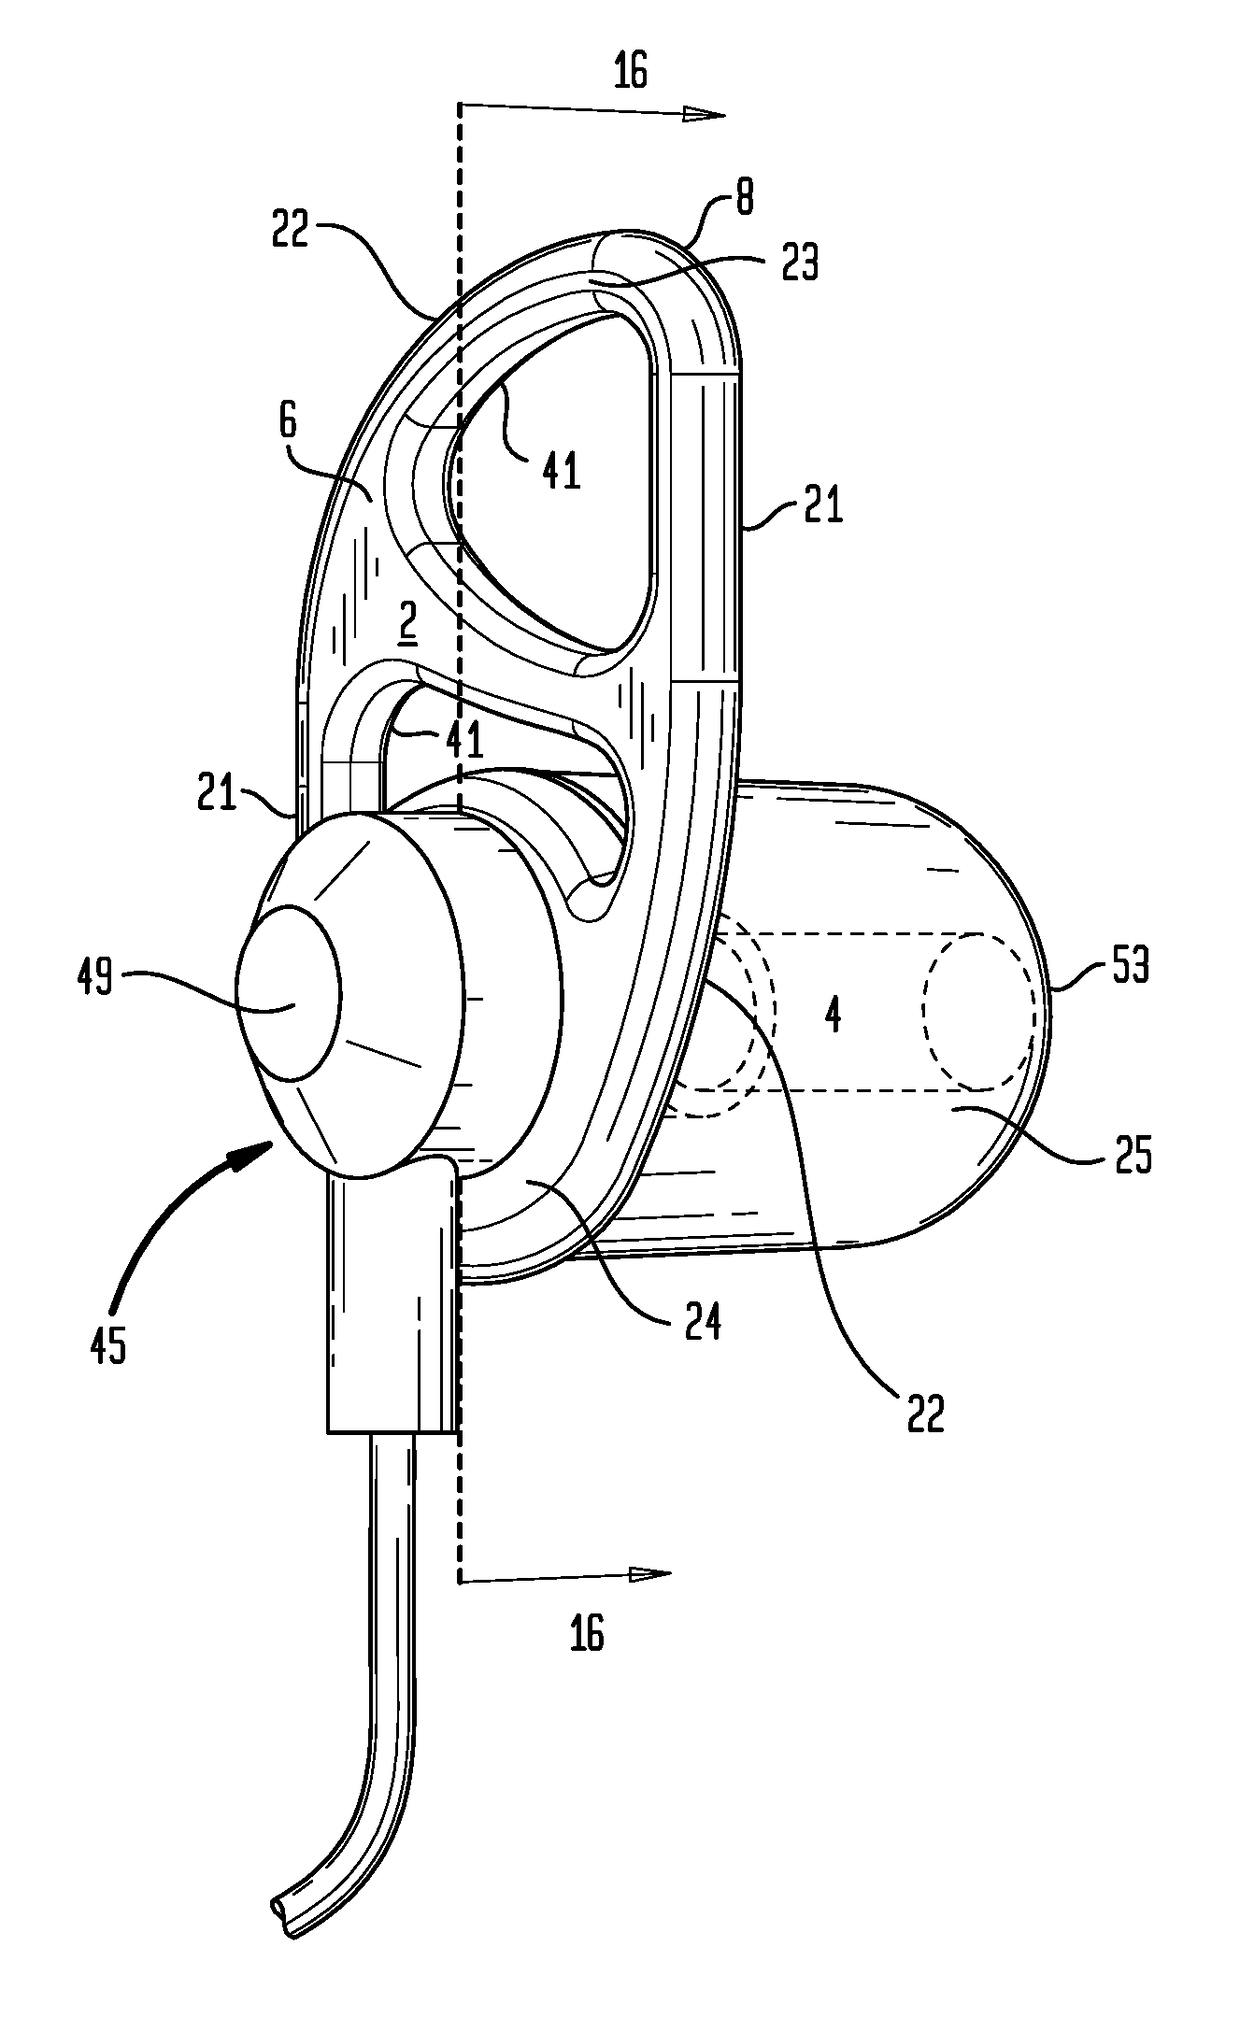 Earpiece Intra-Auricular Support System